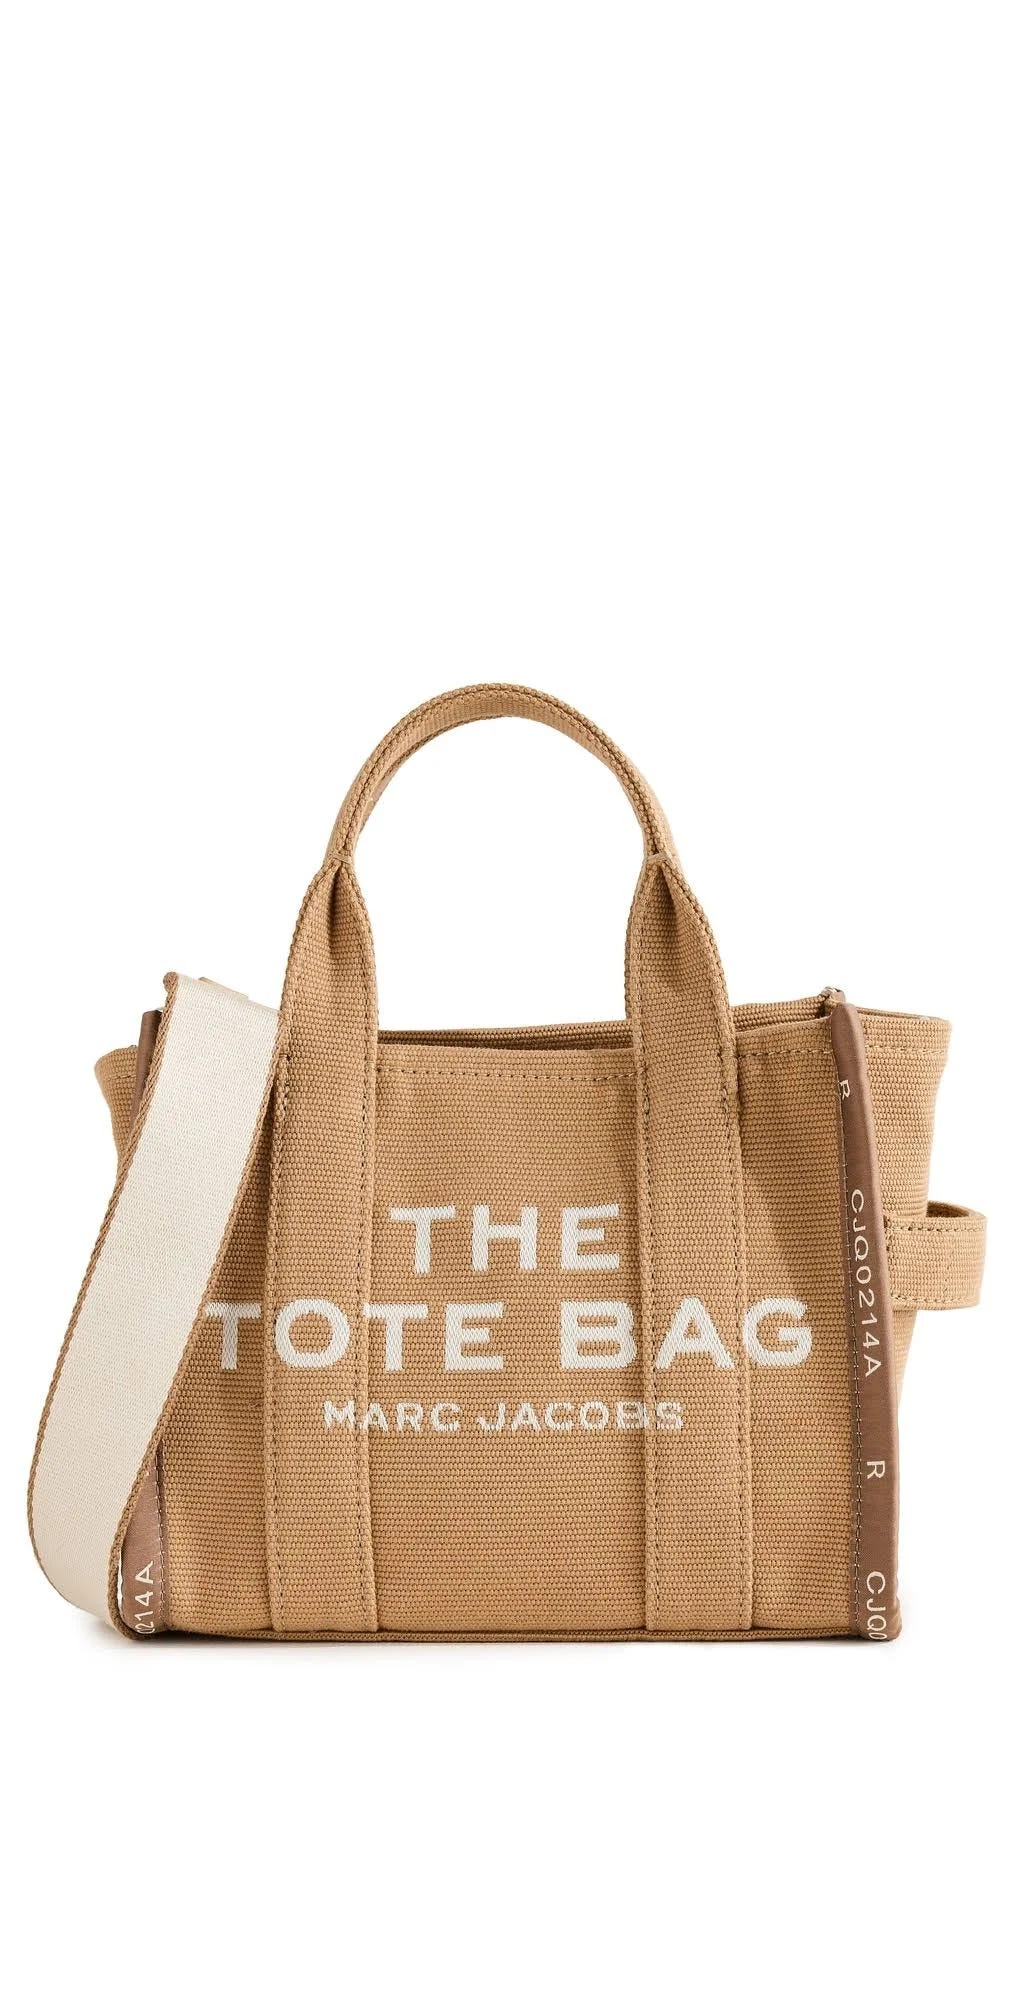 Small Tote by Marc Jacobs - Mini Tote Accessory | Image